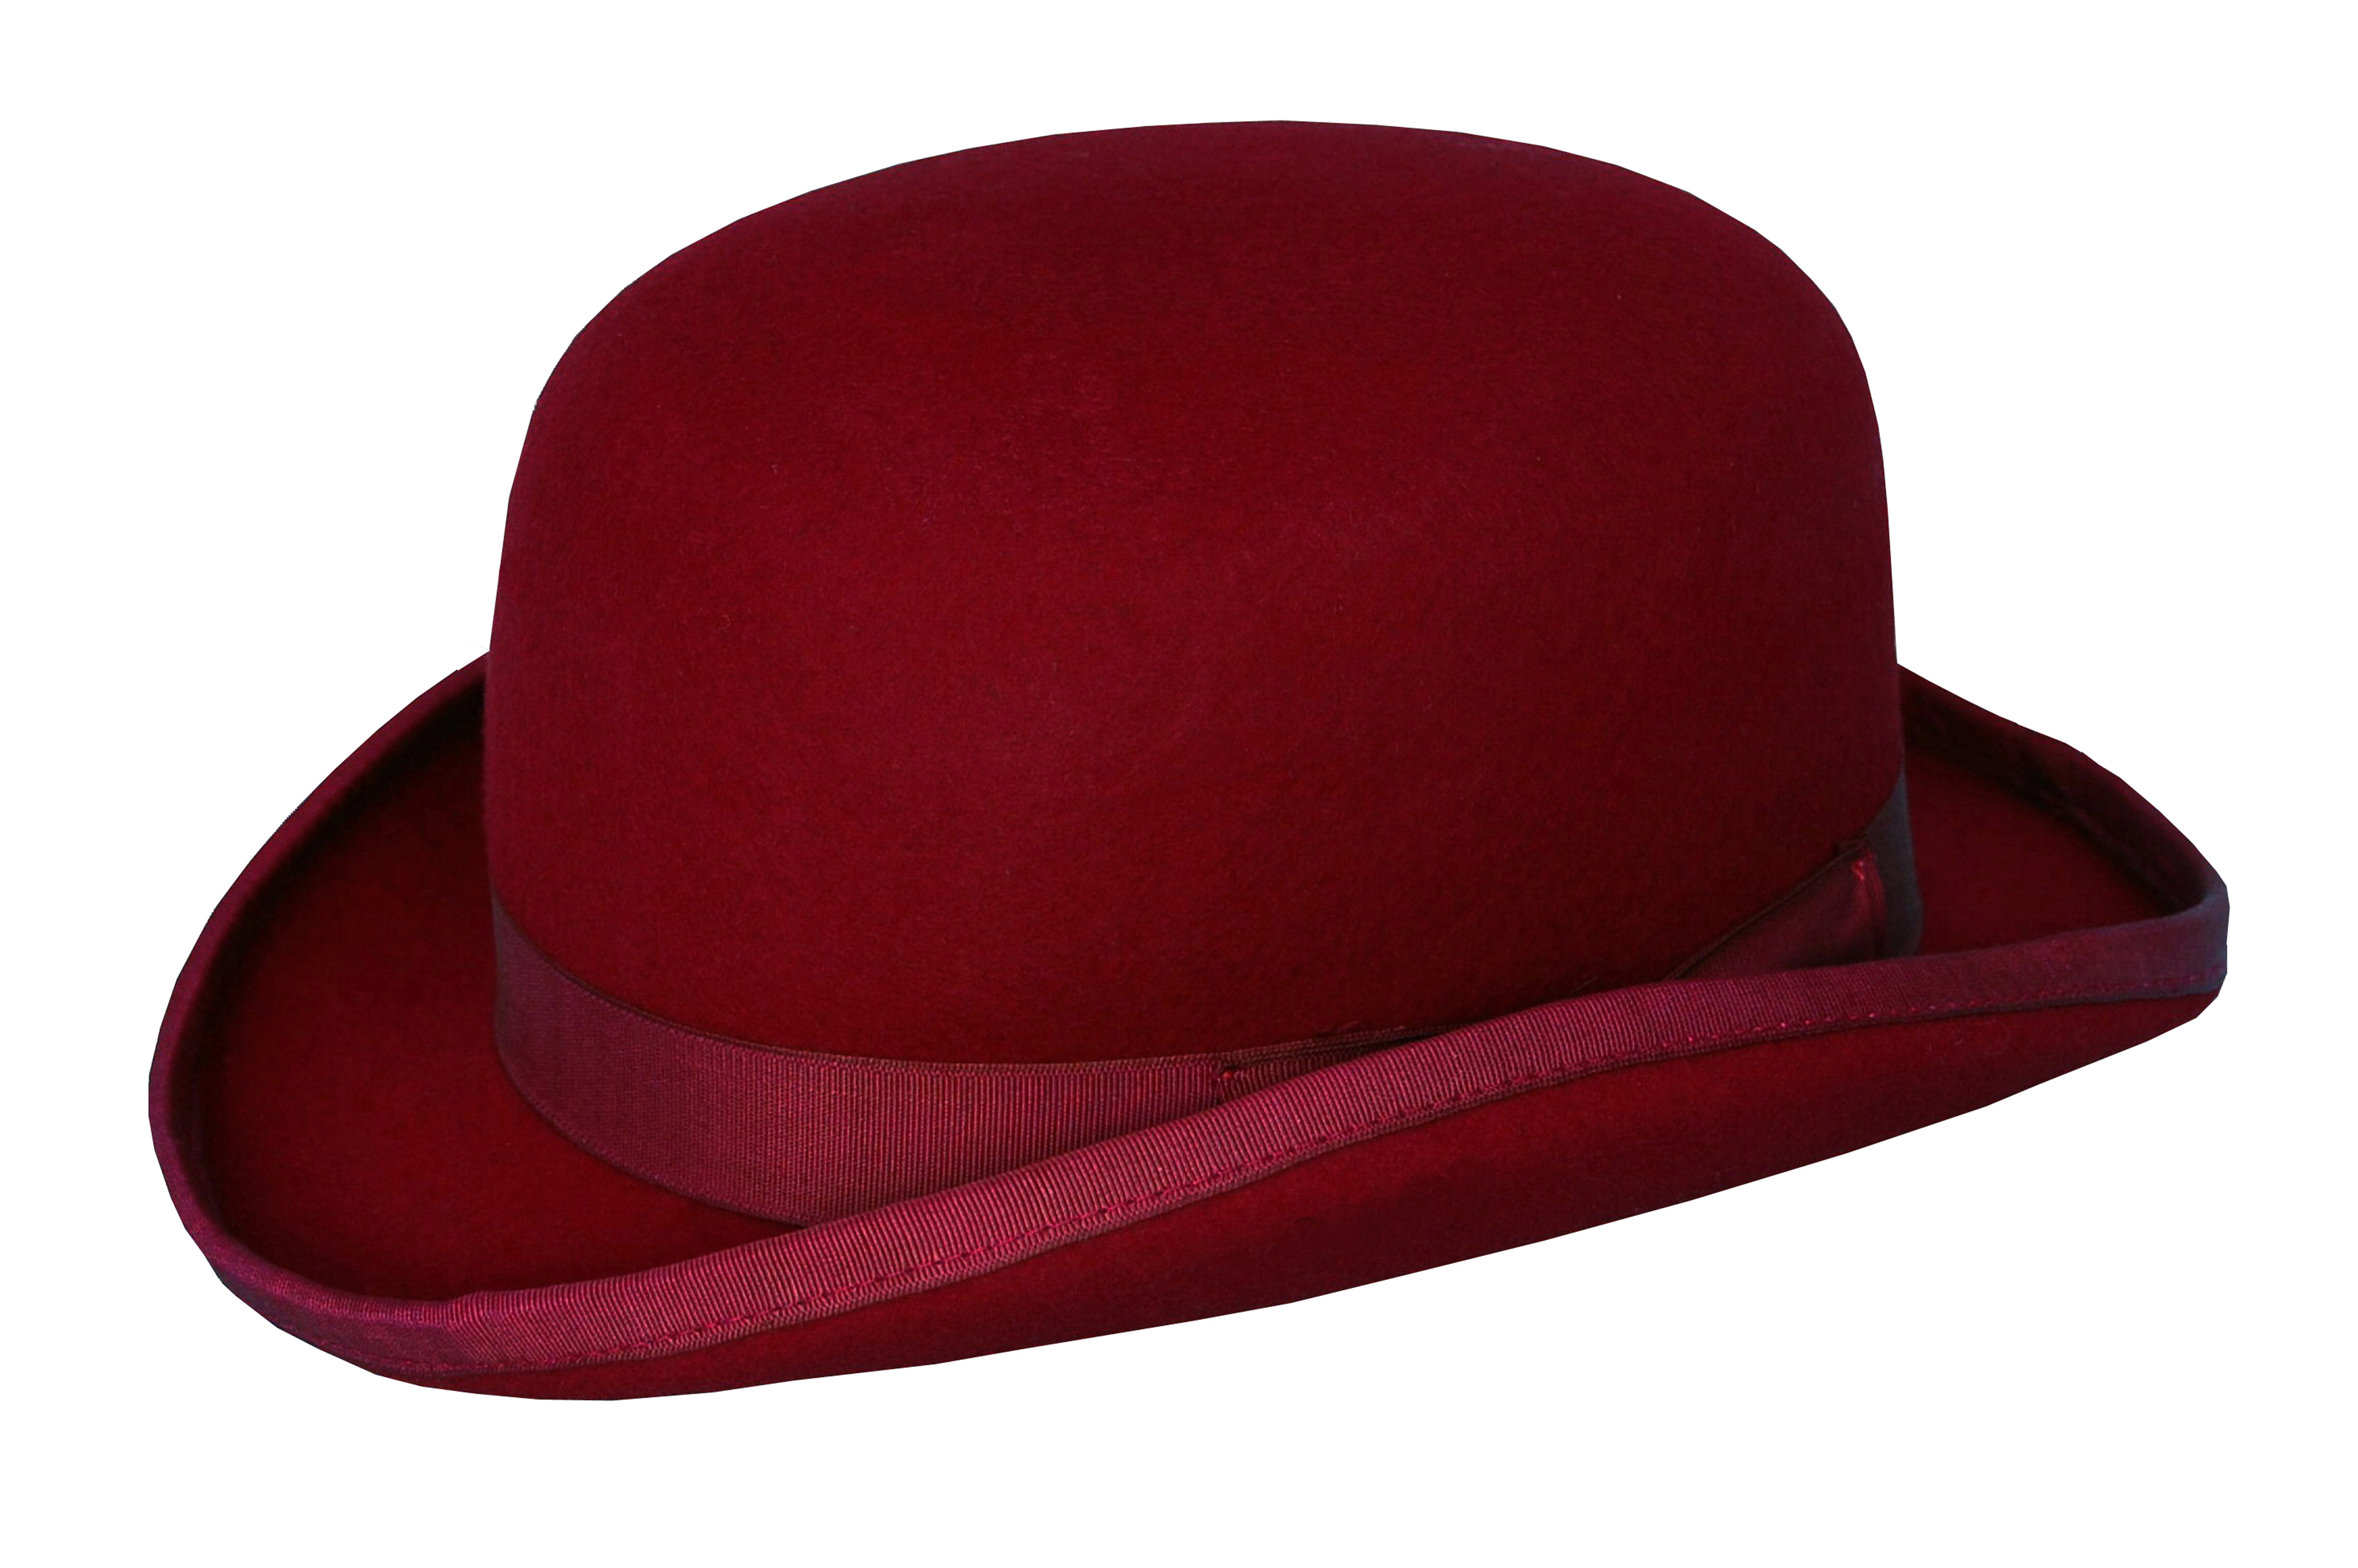 Pictures of top hats